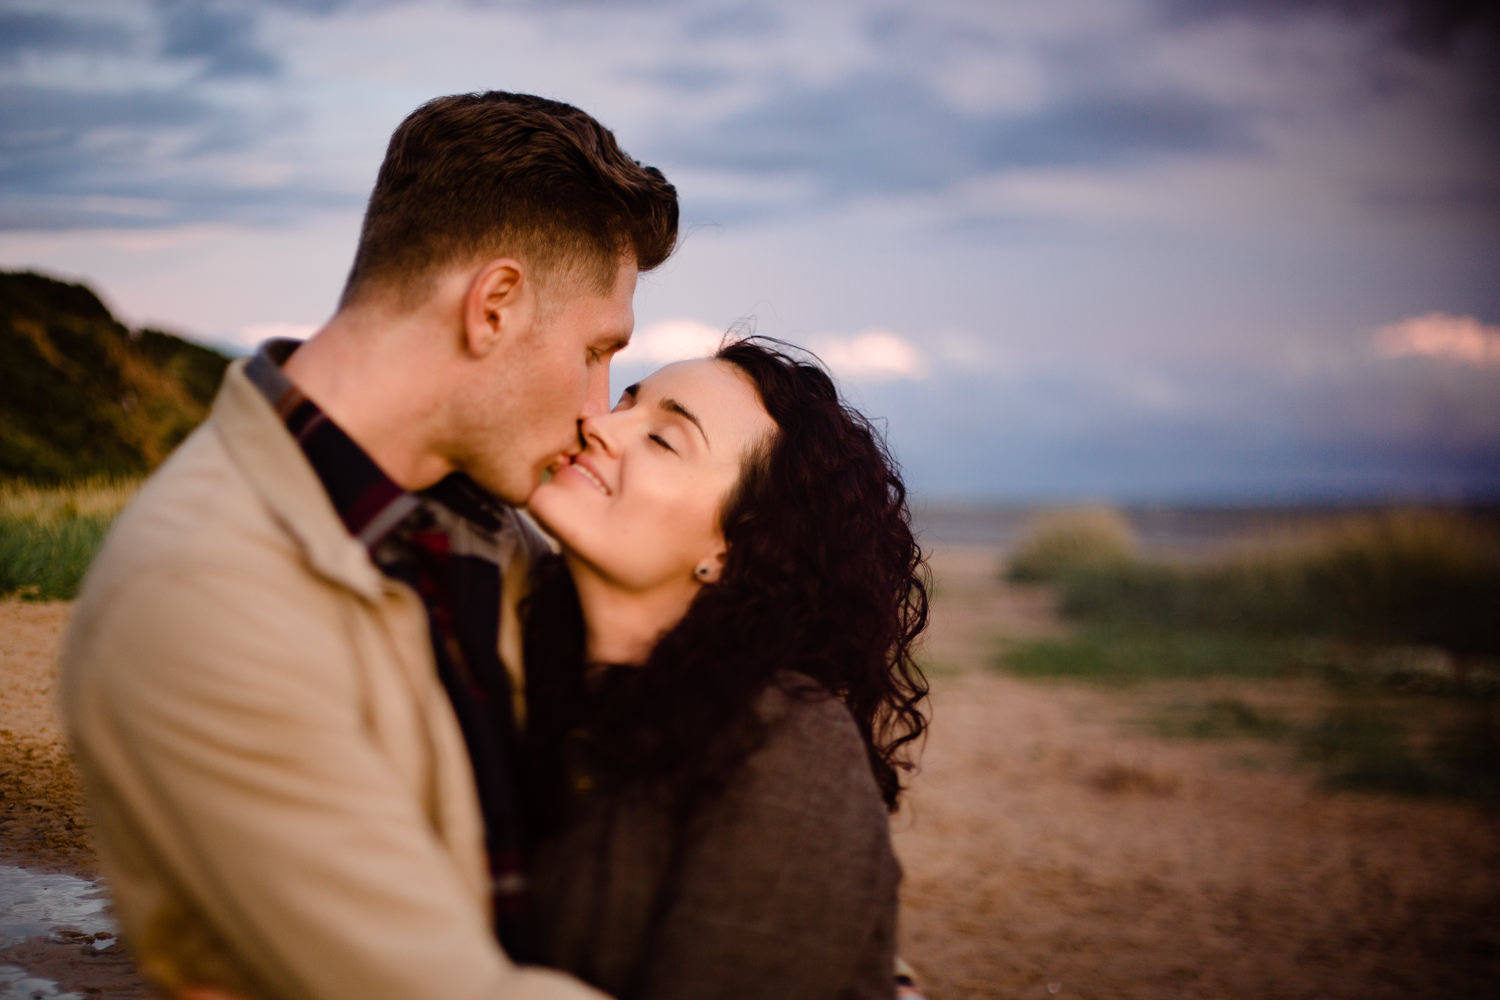 A couple kiss at sunset on a beach - Freelensing shot